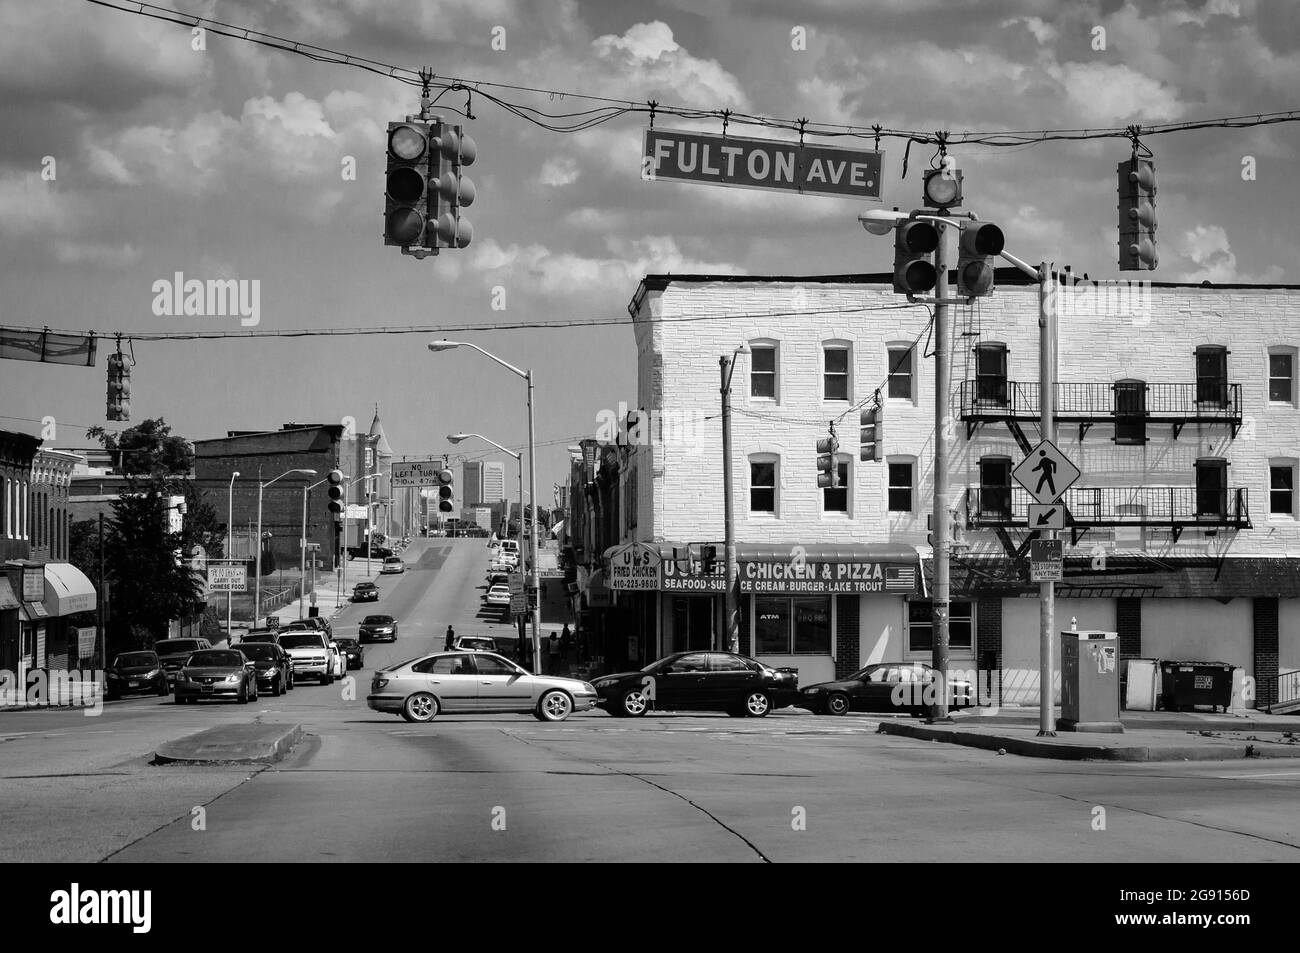 Intersection of Pennsylvania Avenue and Fulton Avenue in Baltimore, Maryland. Stock Photo